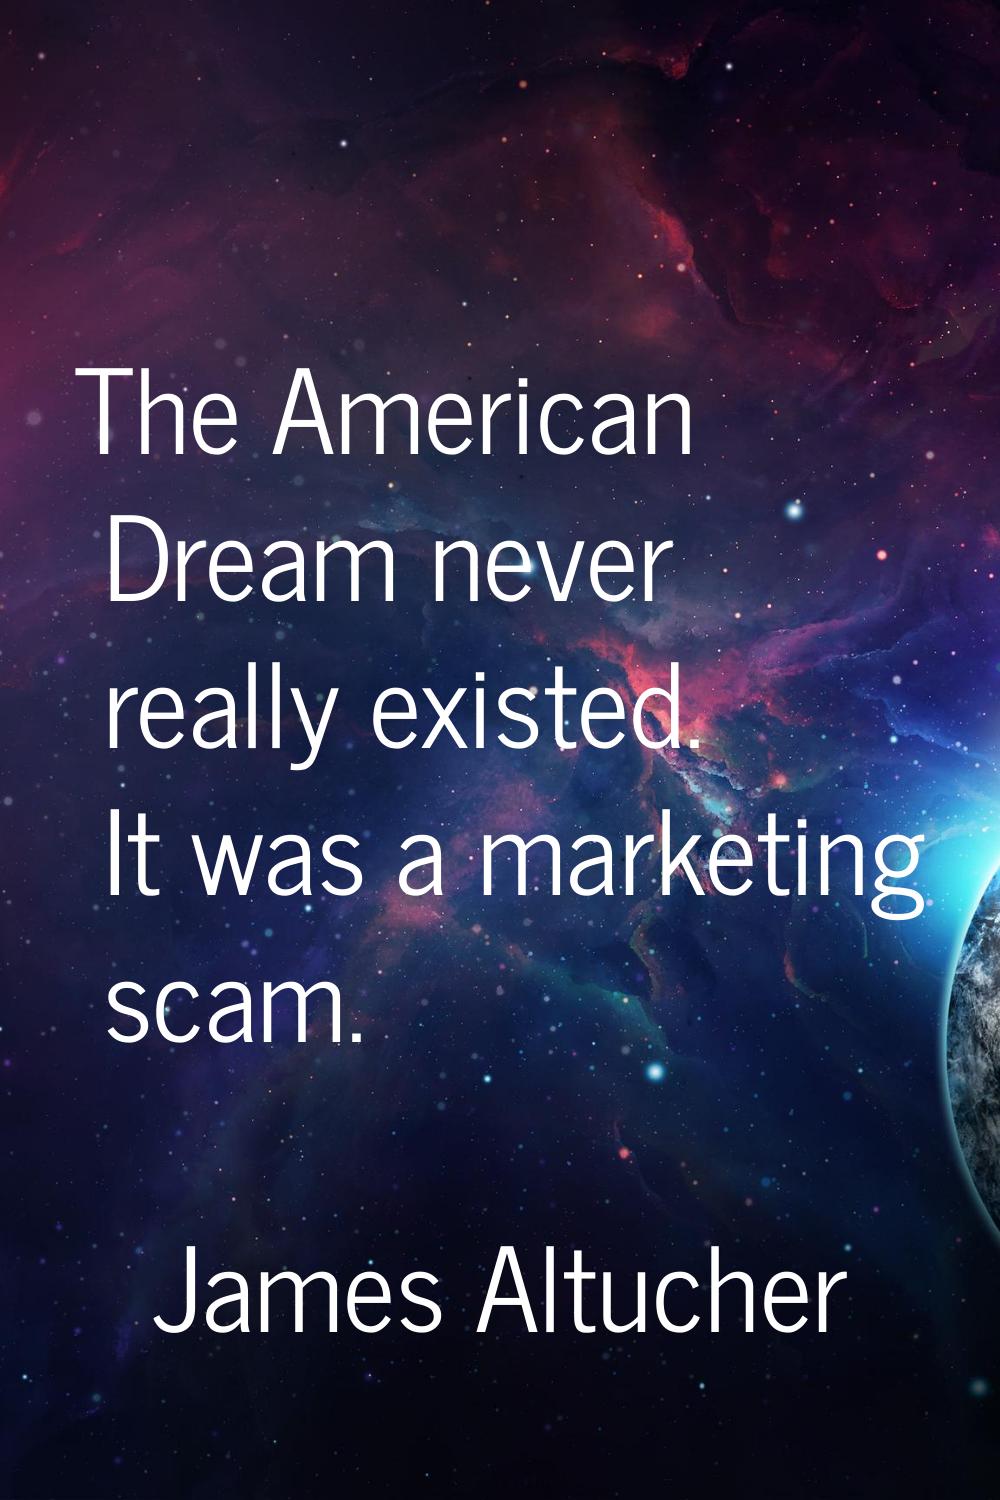 The American Dream never really existed. It was a marketing scam.